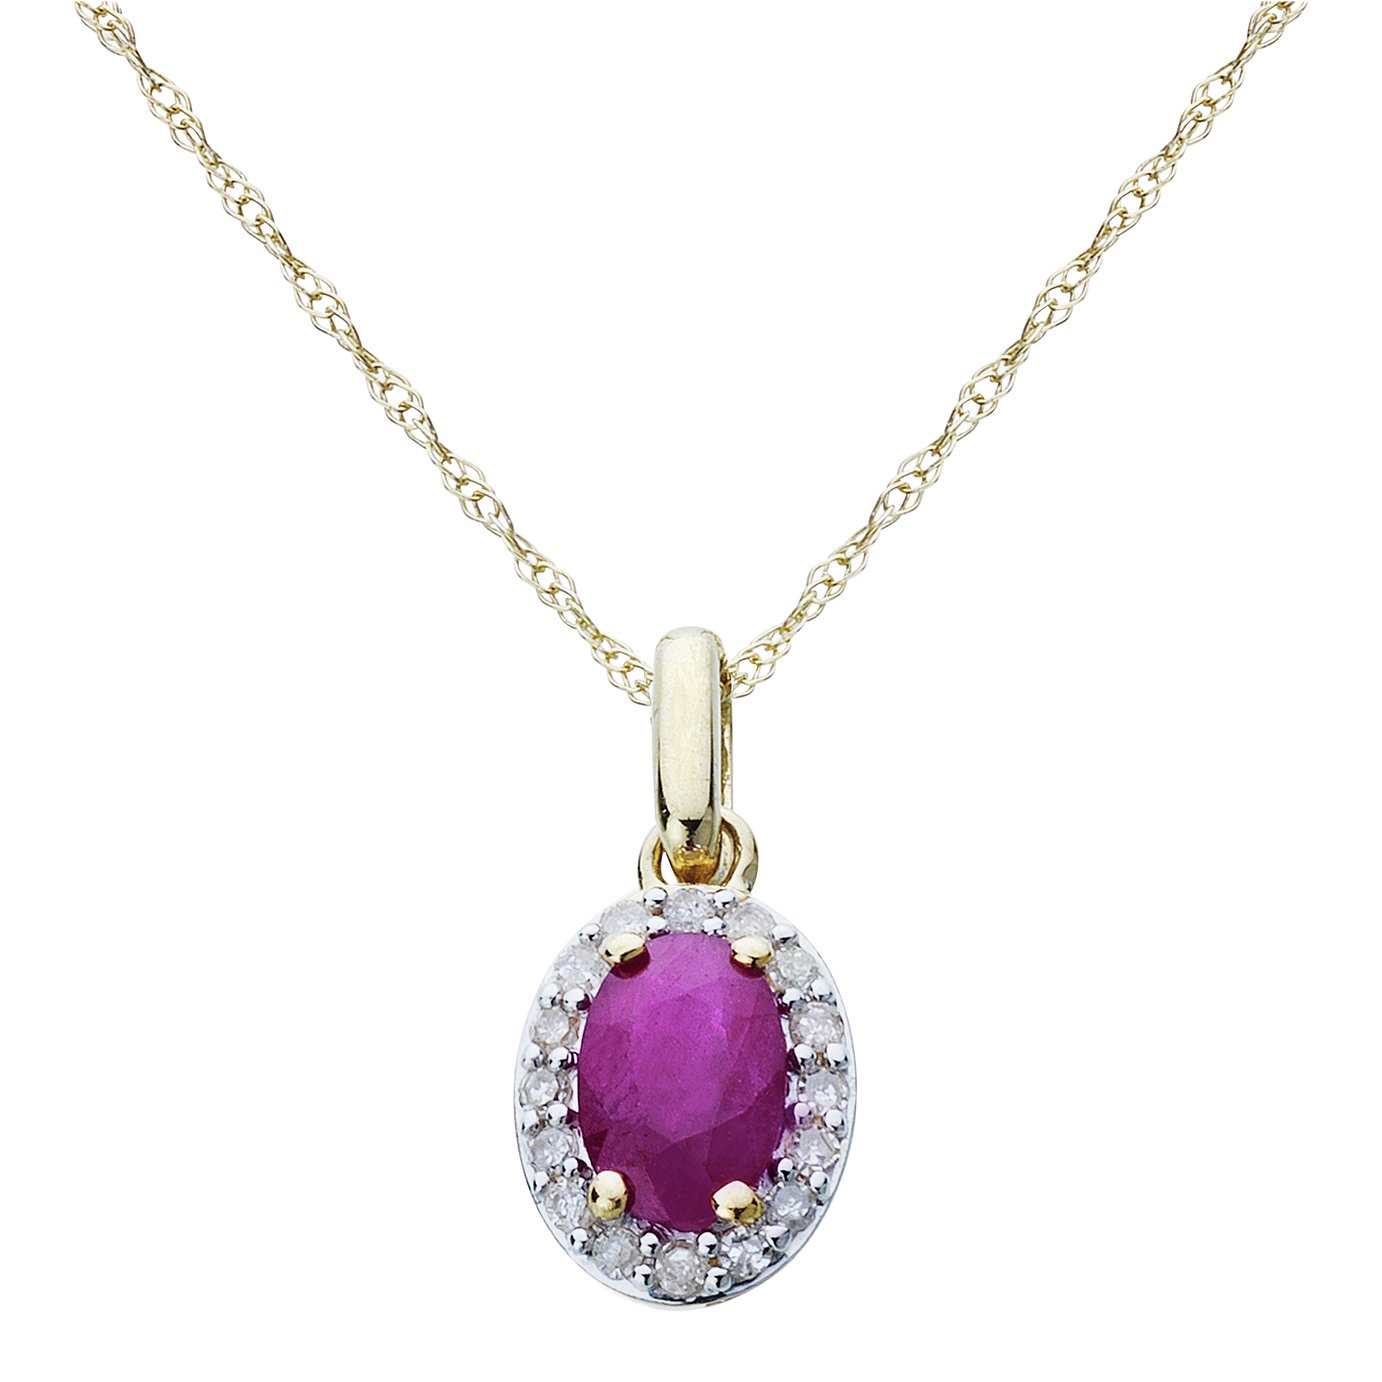 Revere 9ct Gold Ruby & Diamond Pendant Necklace Review